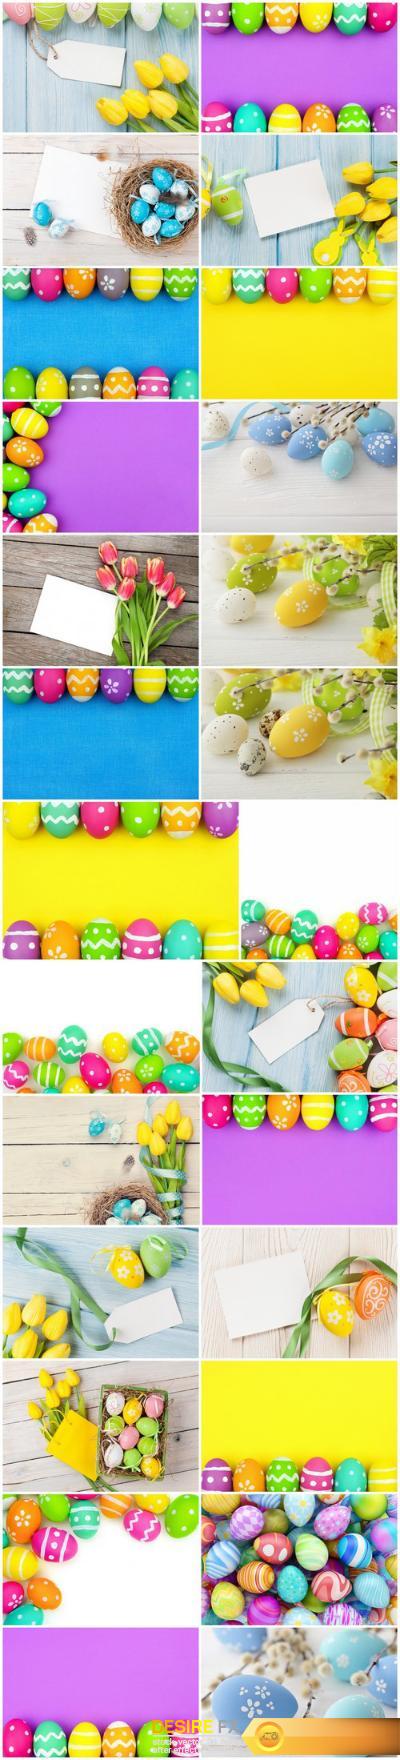 Easter Eggs and Happy Easter - Set of 26xUHQ JPEG Professional Stock Images